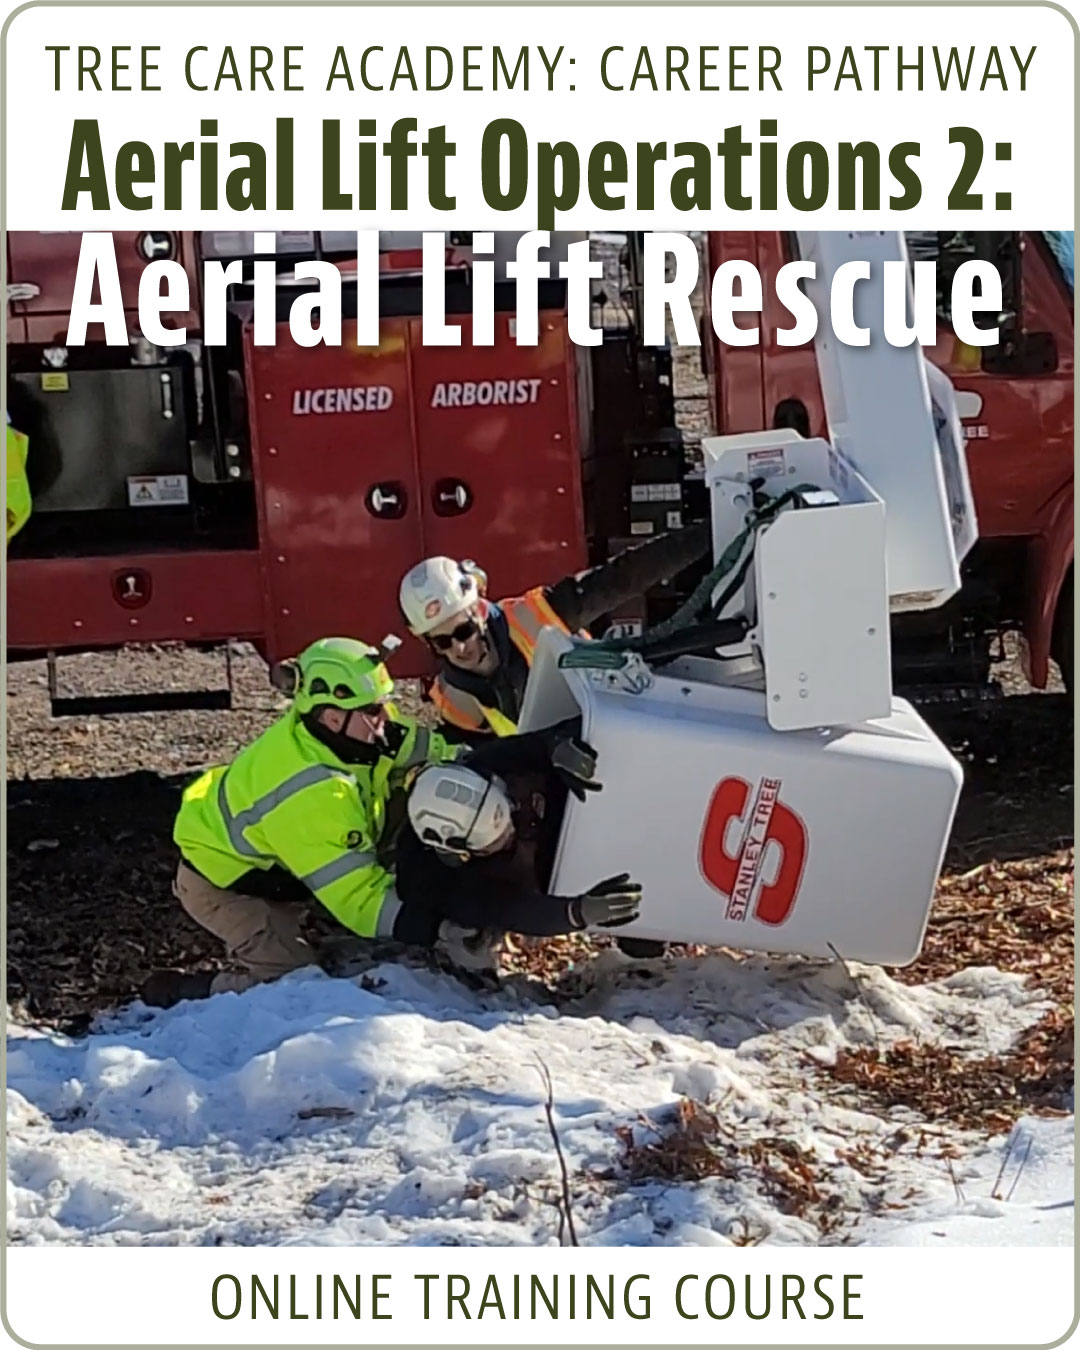 Aerial Lift Operations 2: Aerial Lift Rescue